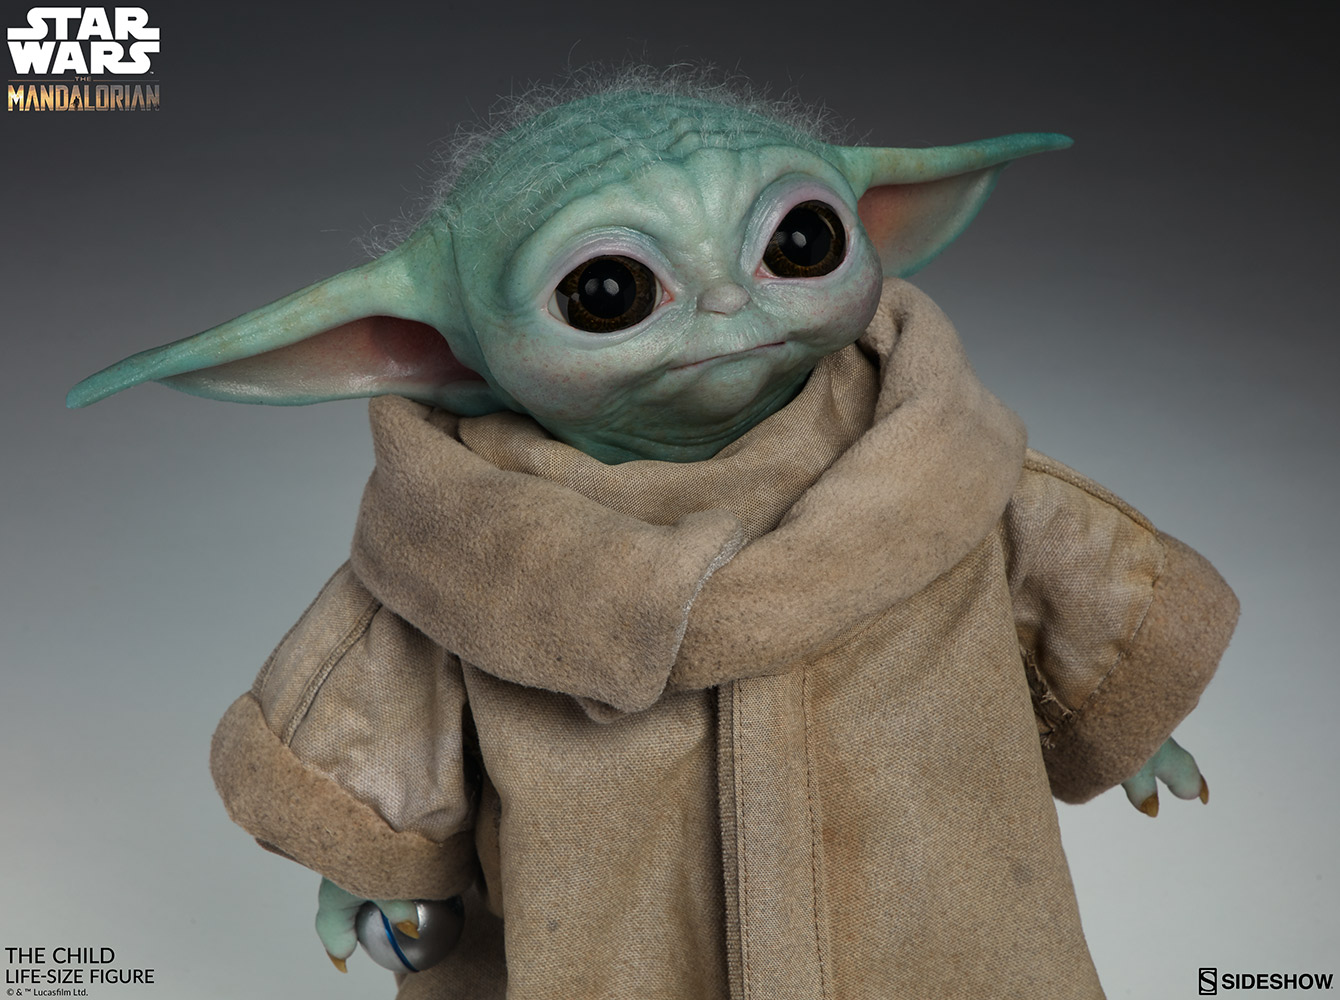 Life-size Baby Yoda is Super Adorable, But Not Very affordable